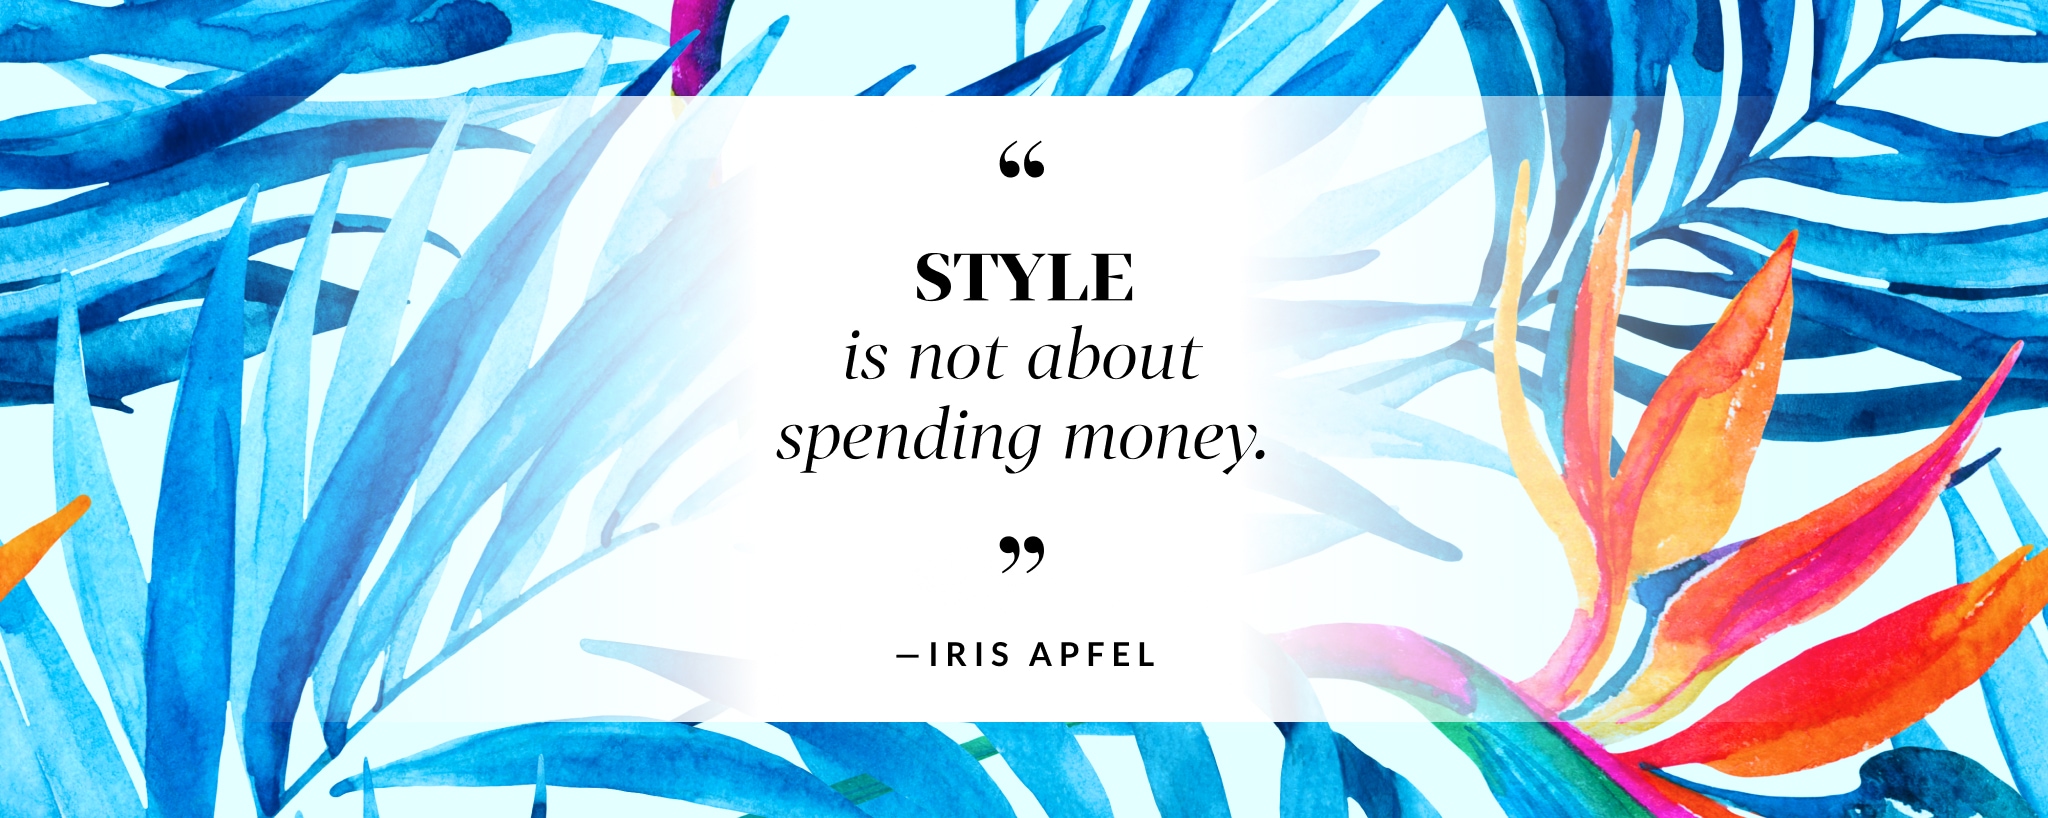 Image of a quote that says 'style is not about spending money' by Iris Apfel surround by a tropical background.